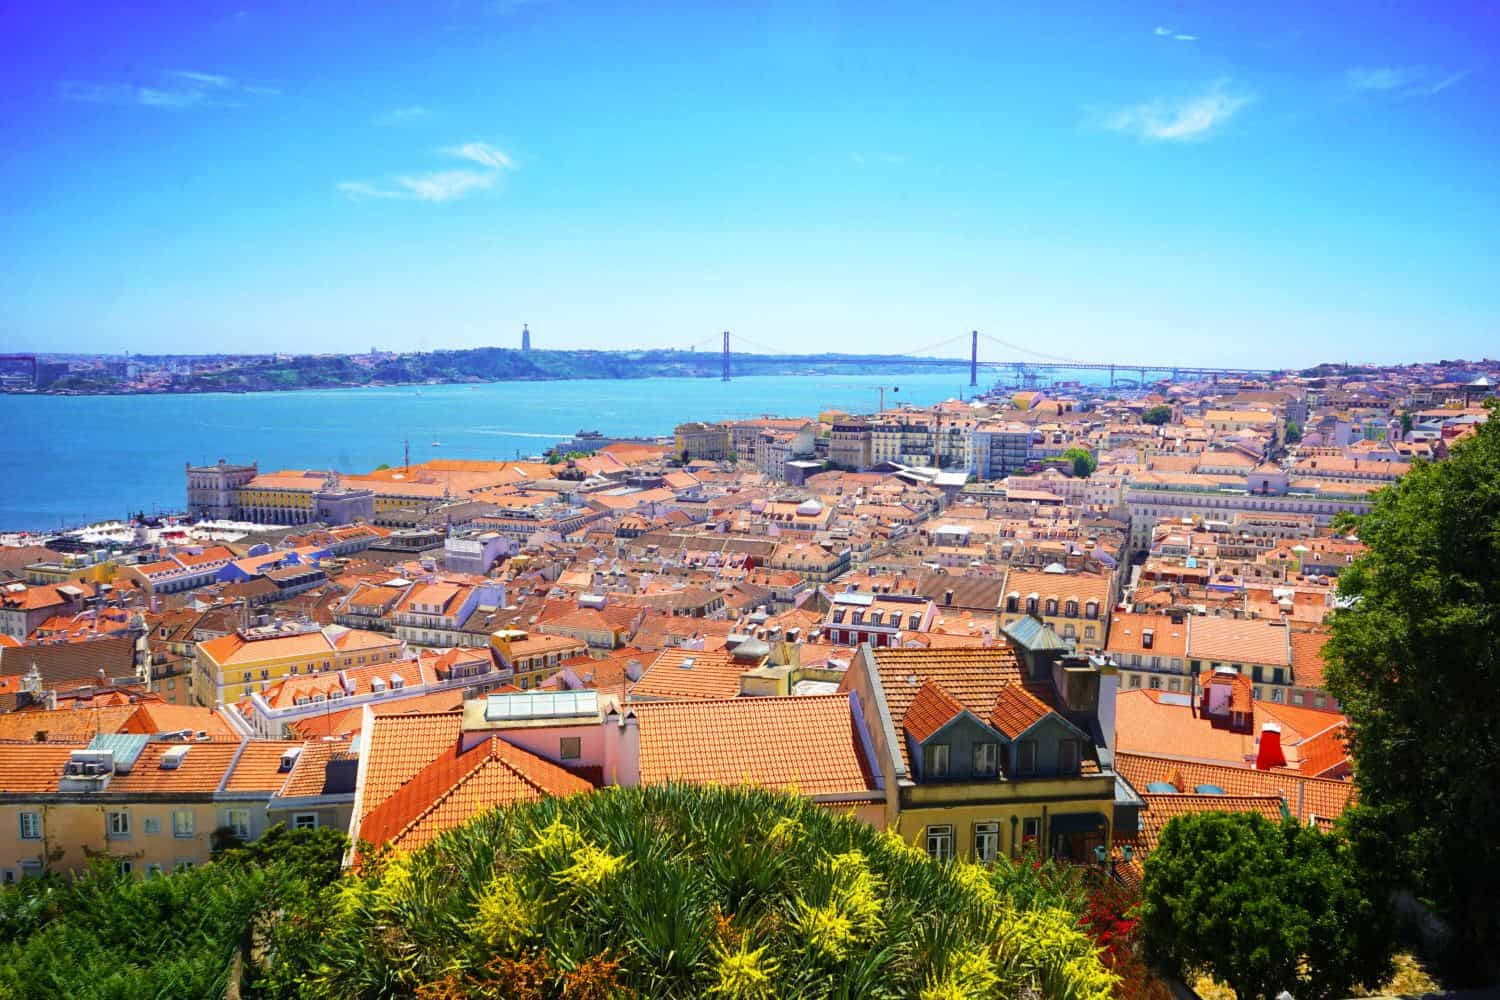 Views from Lisbon's castle